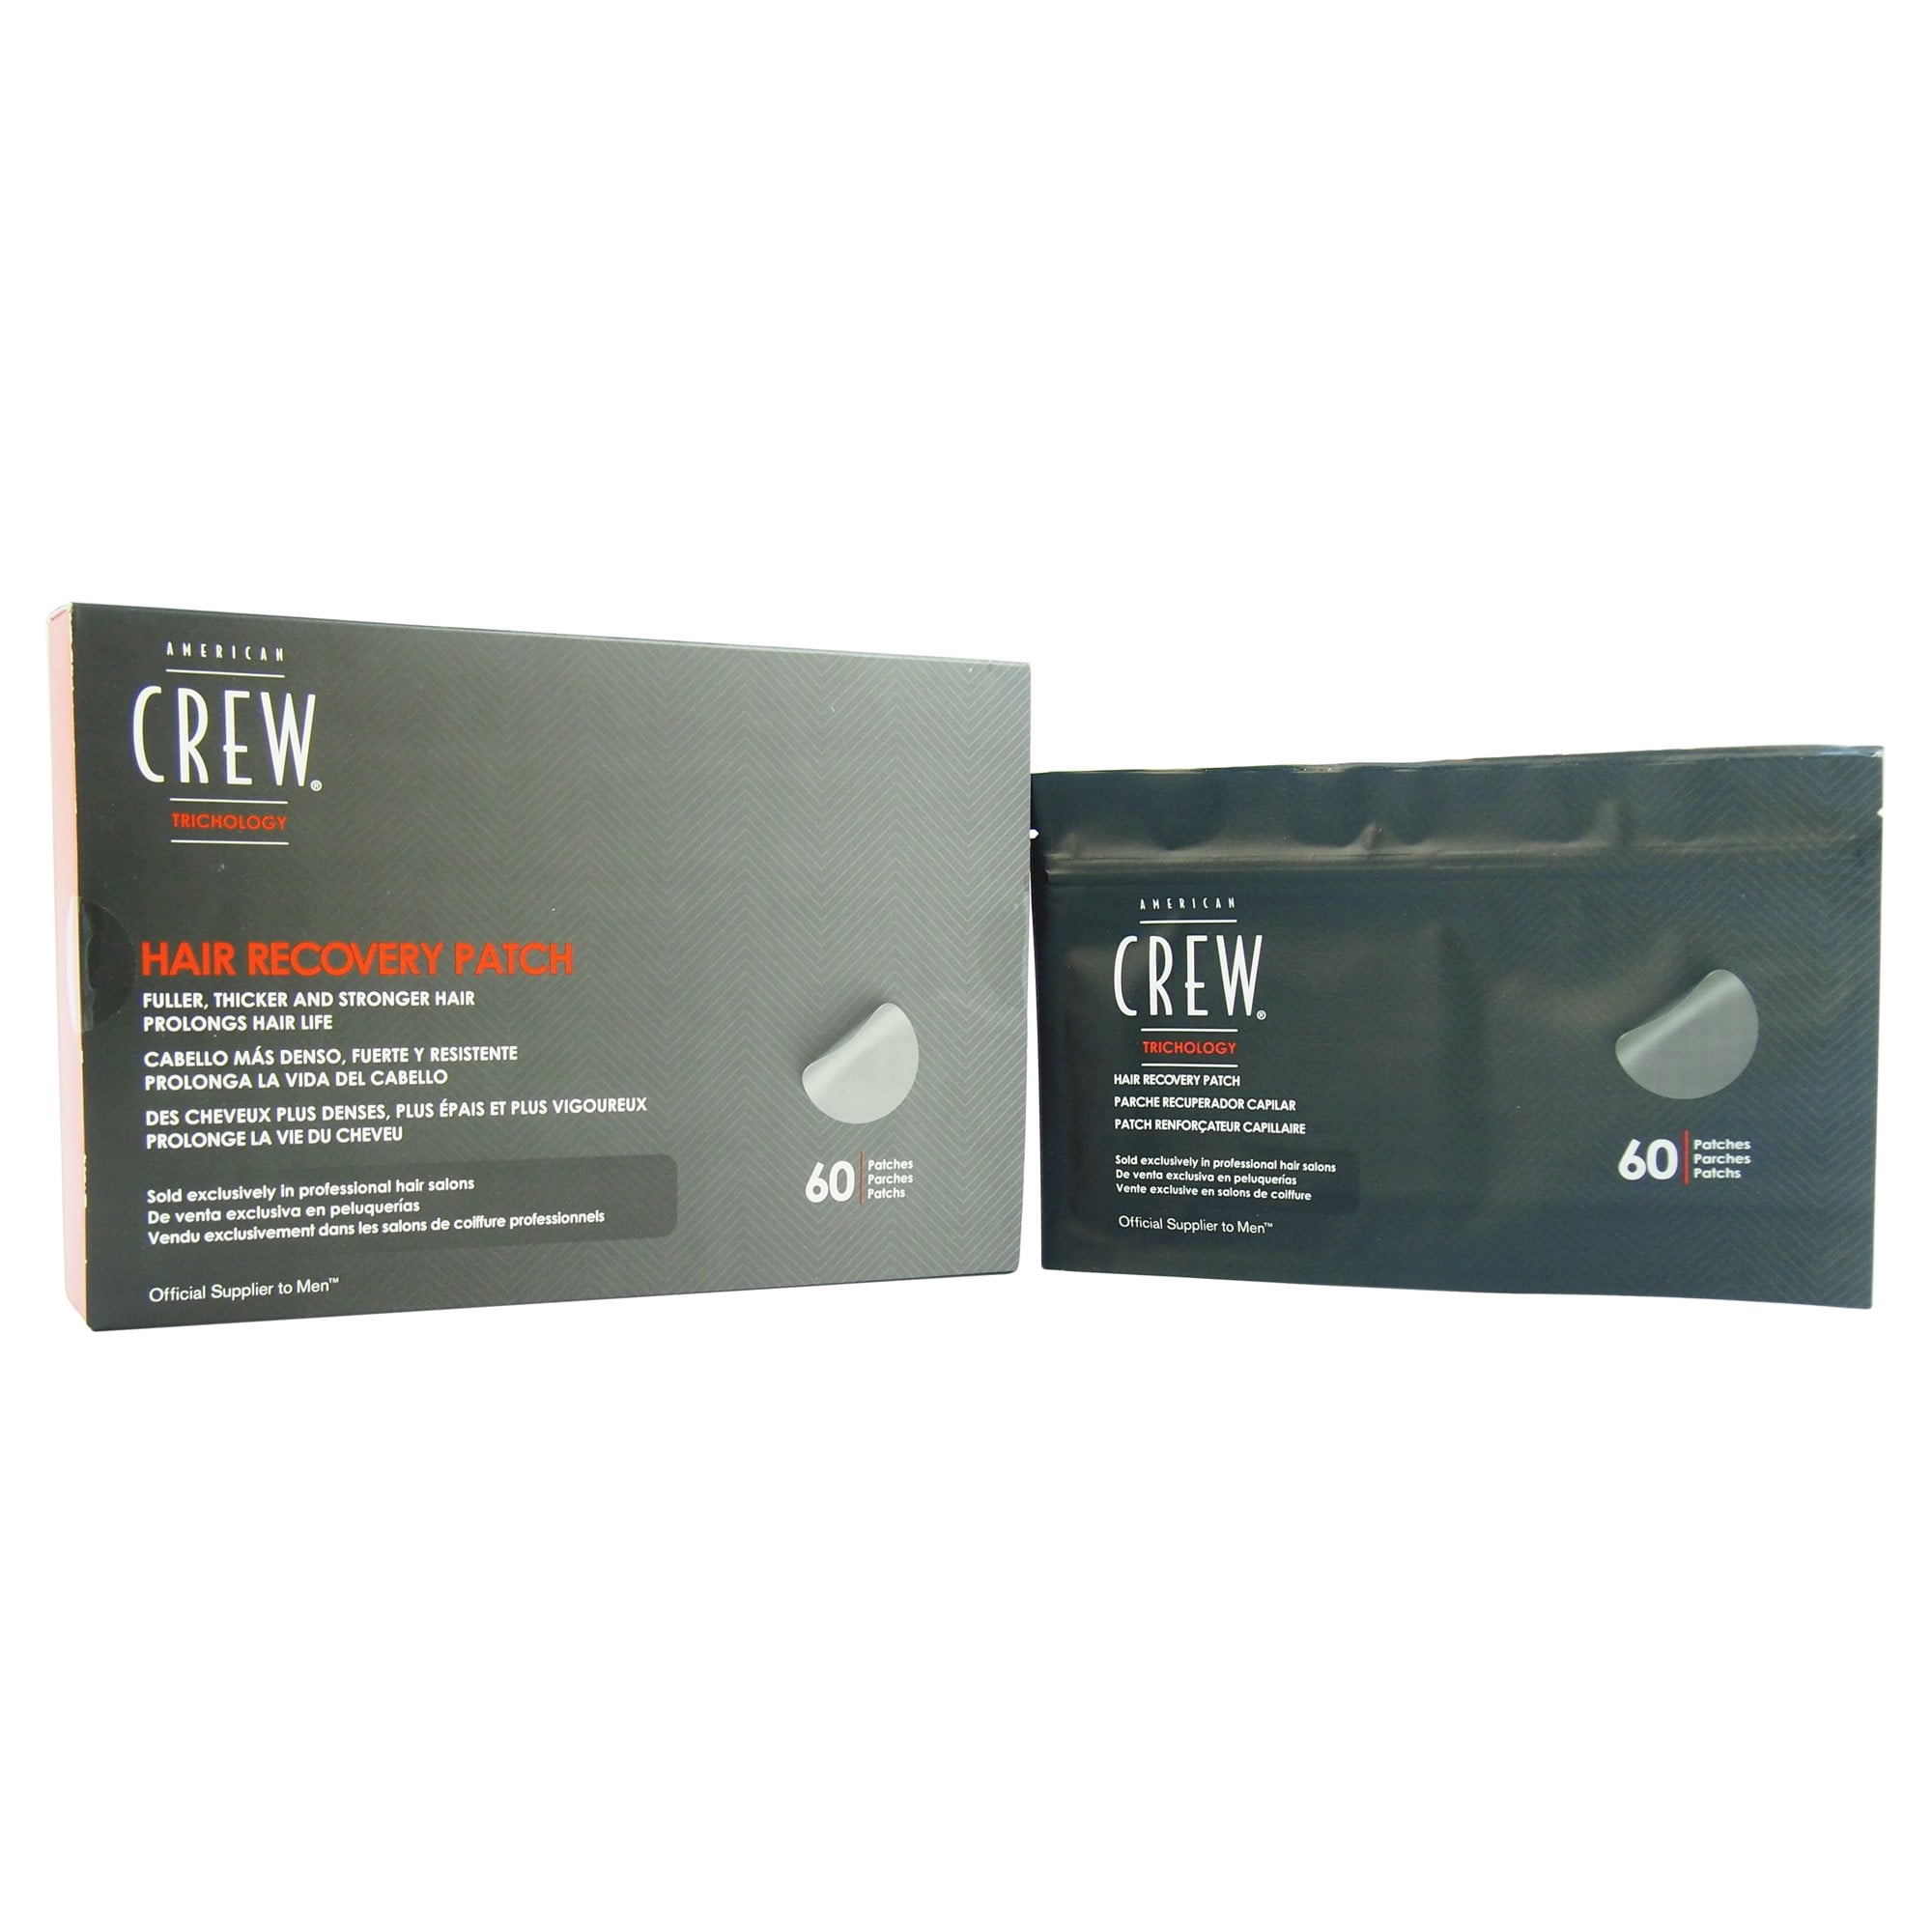 American Crew Trichology Hair Recovery Patch 60 PC